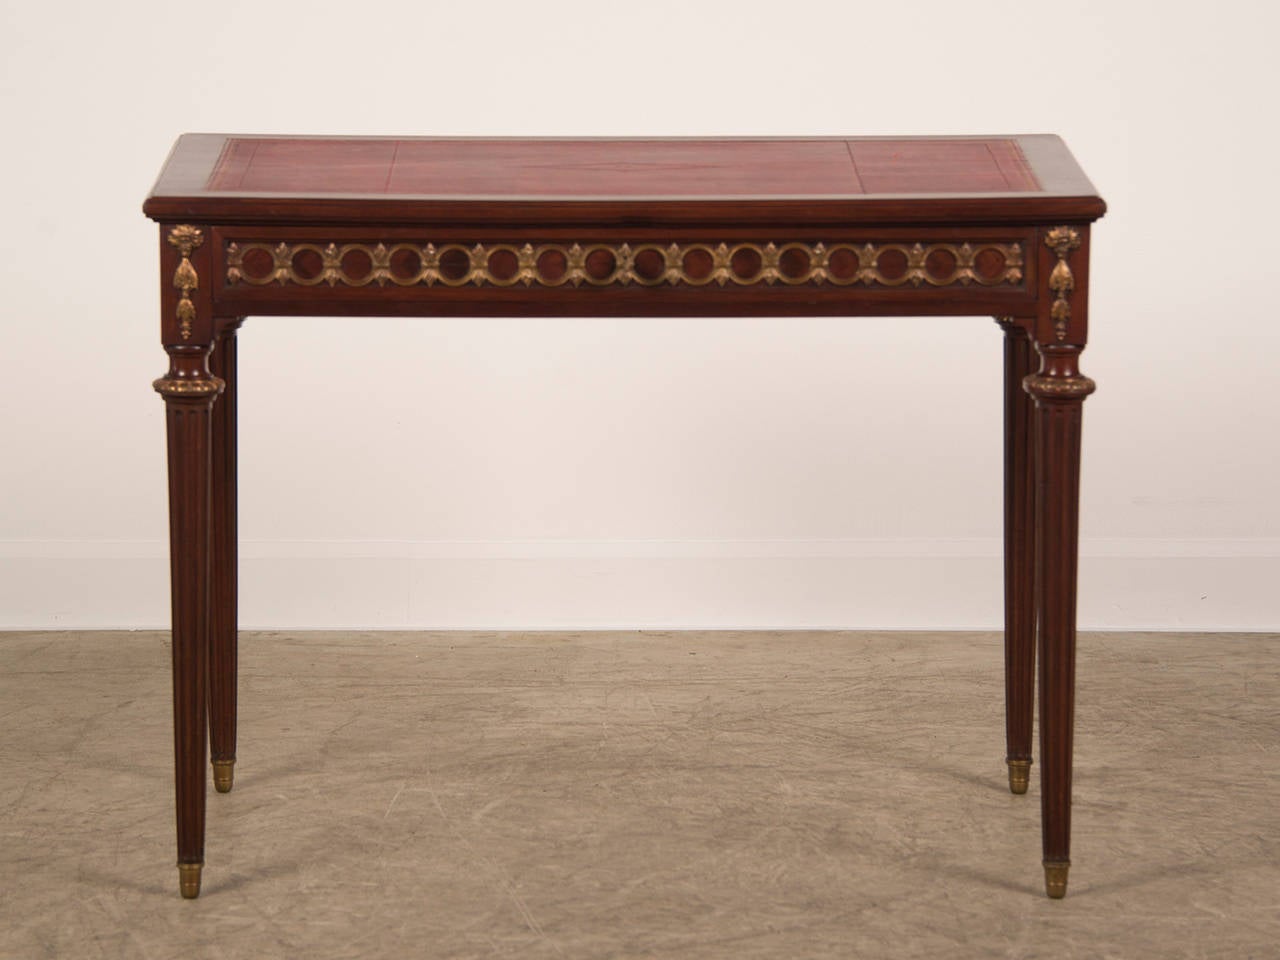 Receive our new selections direct from 1stdibs by email each week. Please click Follow Dealer below and see them first!

Louis XVI style vintage French mahogany writing table or escritoire circa 1940 having a single long drawer across the front